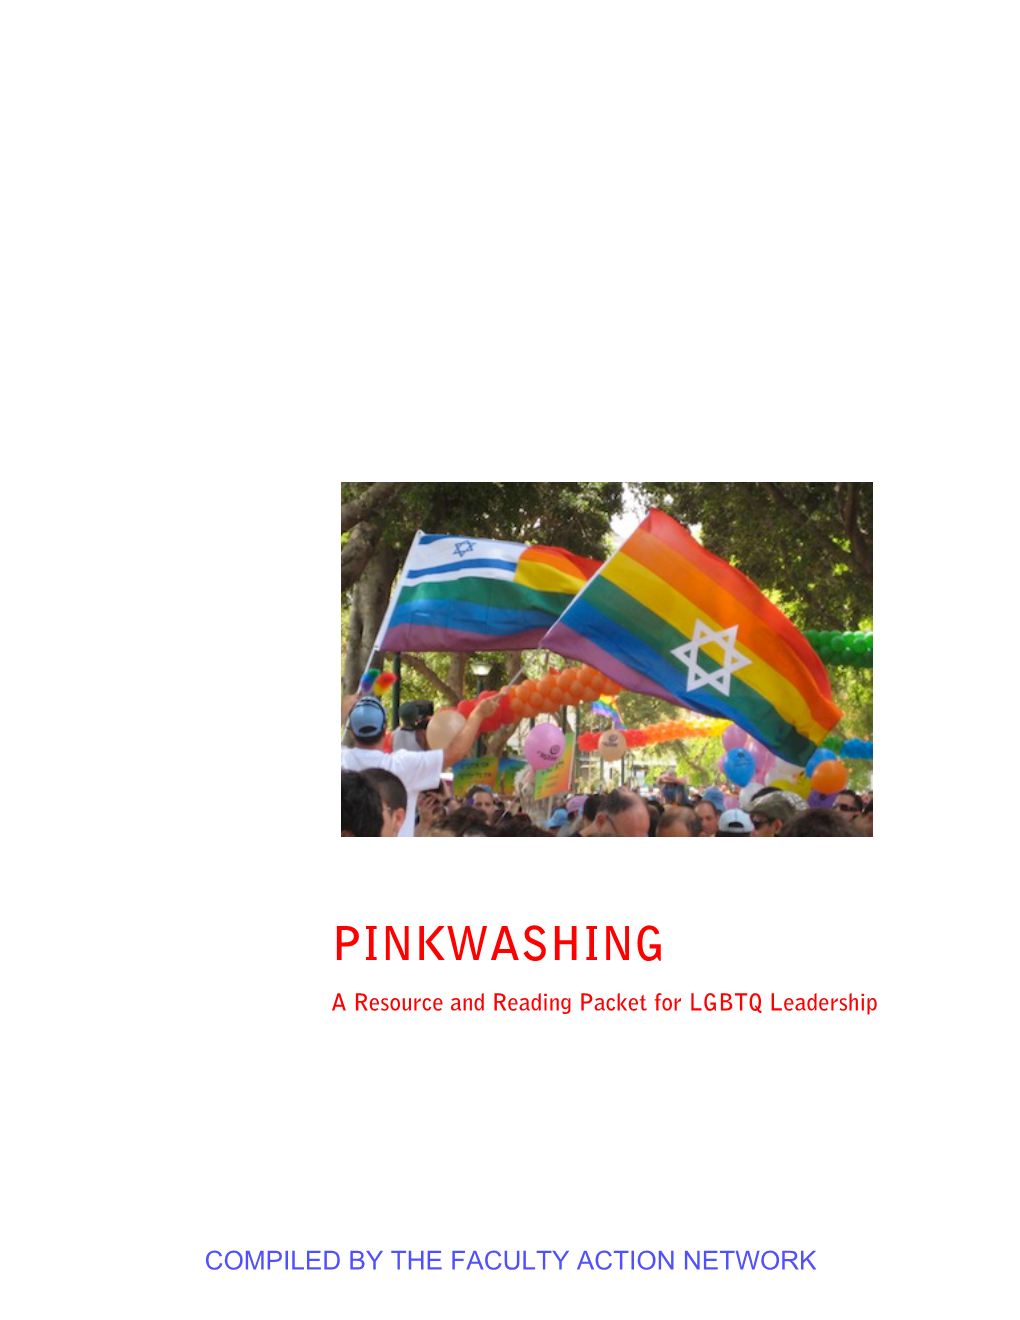 PINKWASHING a Resource and Reading Packet for LGBTQ Leadership